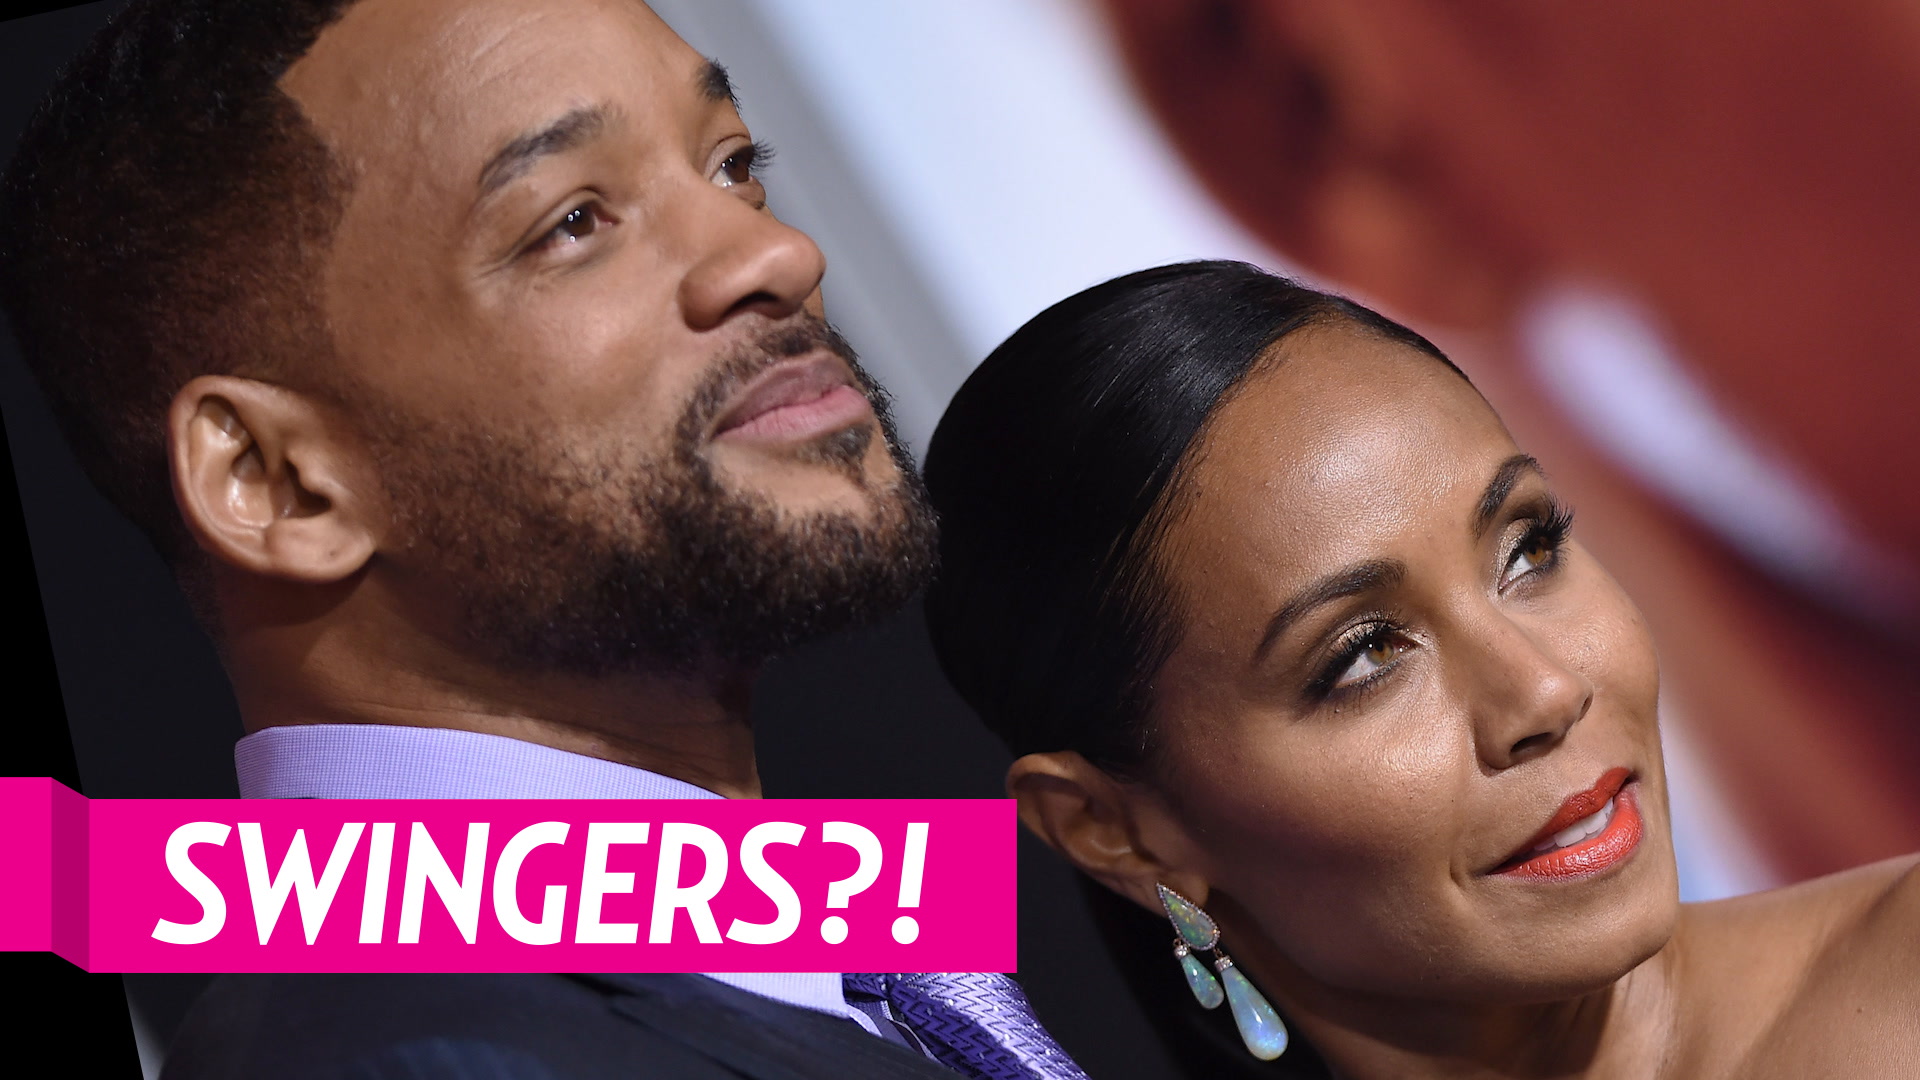 Jada Pinkett Smith Addresses Rumors She and Will Smith Are Swingers image pic